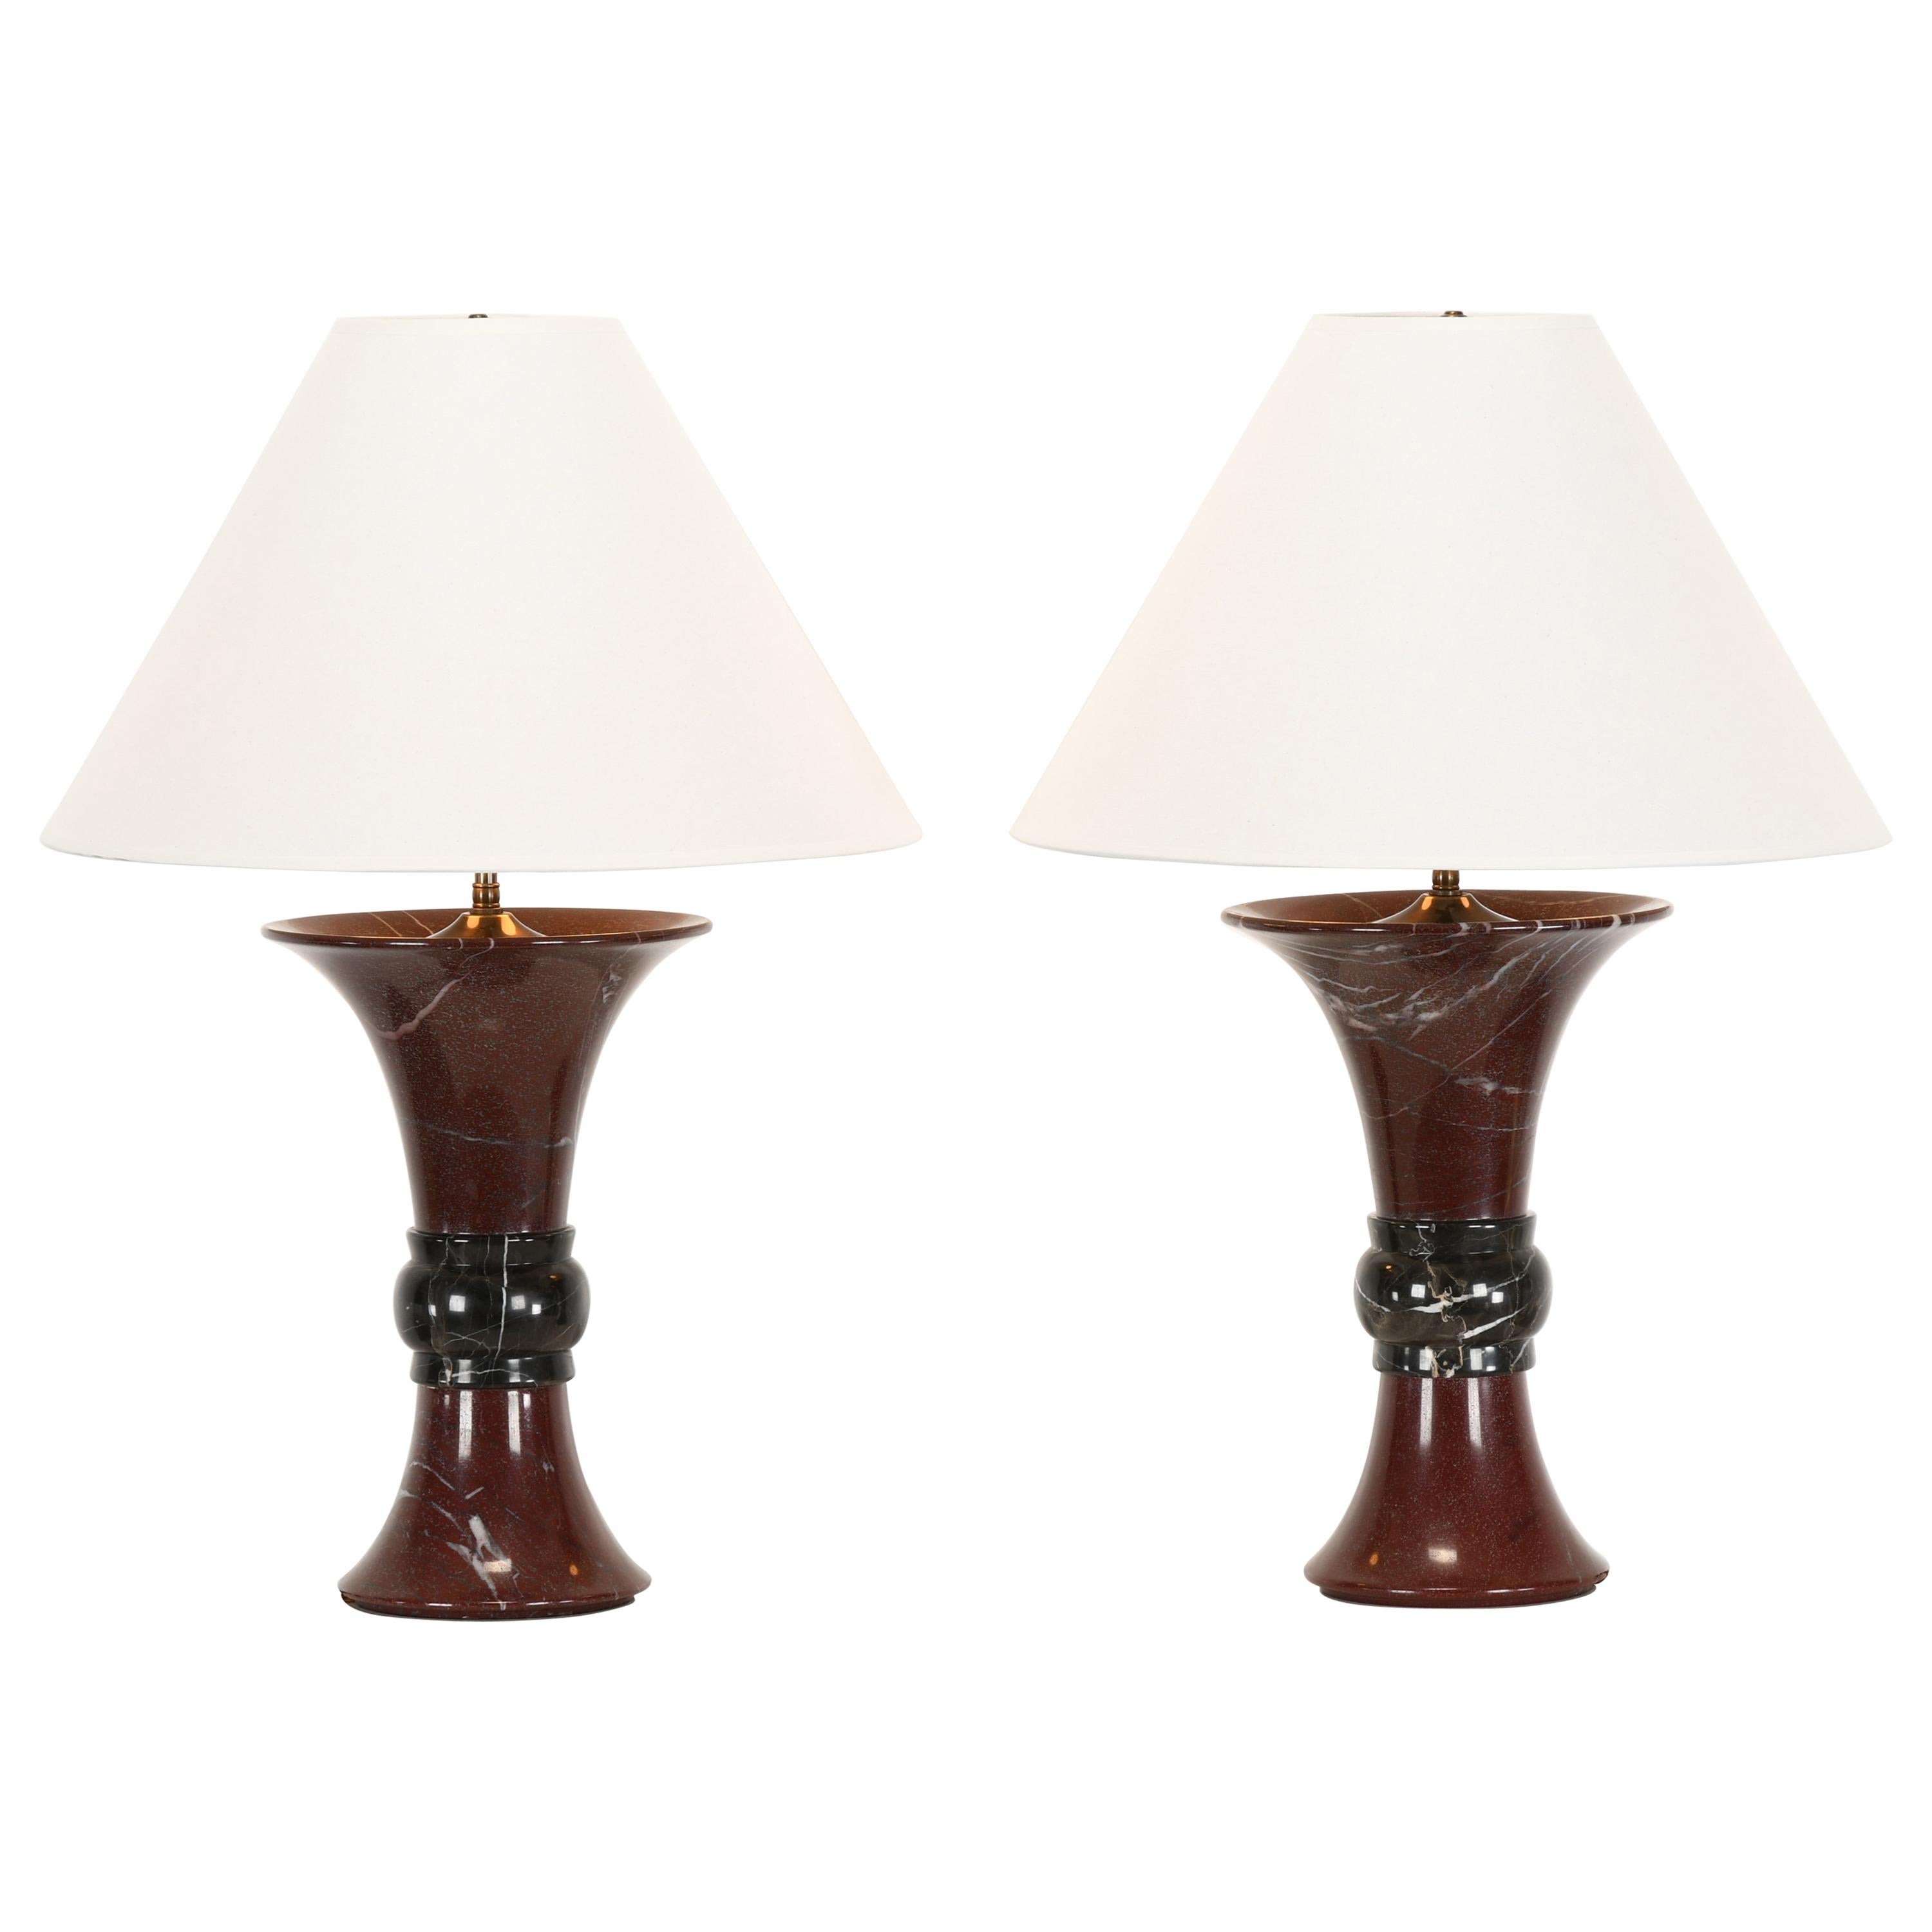 Pair of Donghia Marble Lamps, 1990s